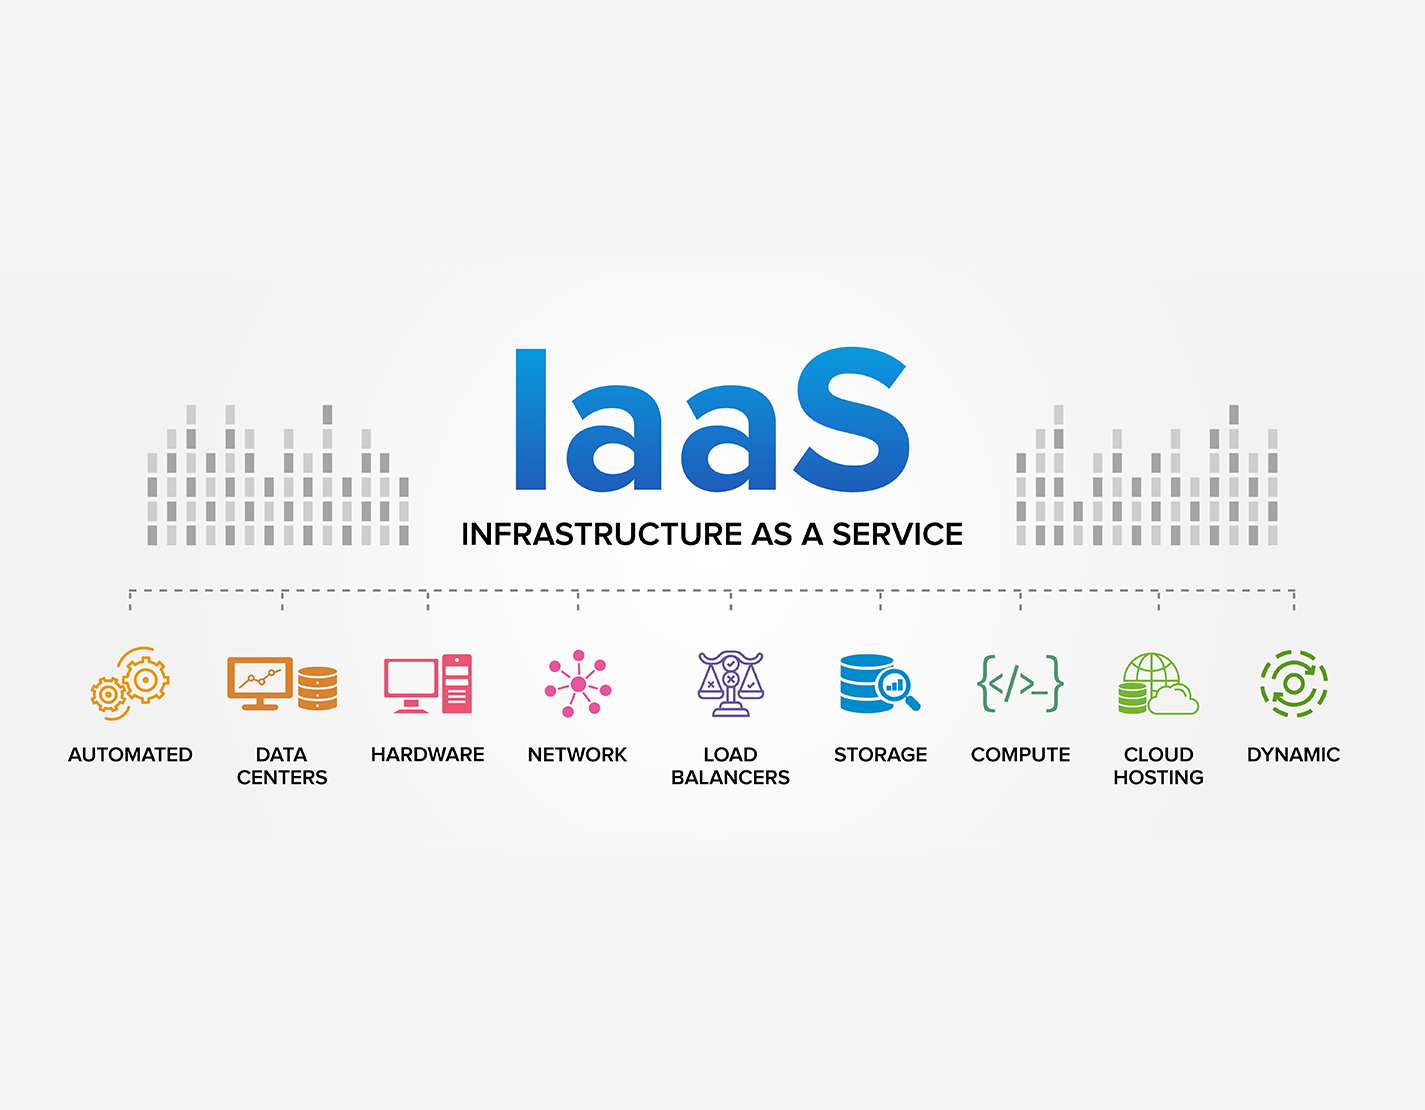 Infrastructure-as-a-Service (IaaS) Solutions